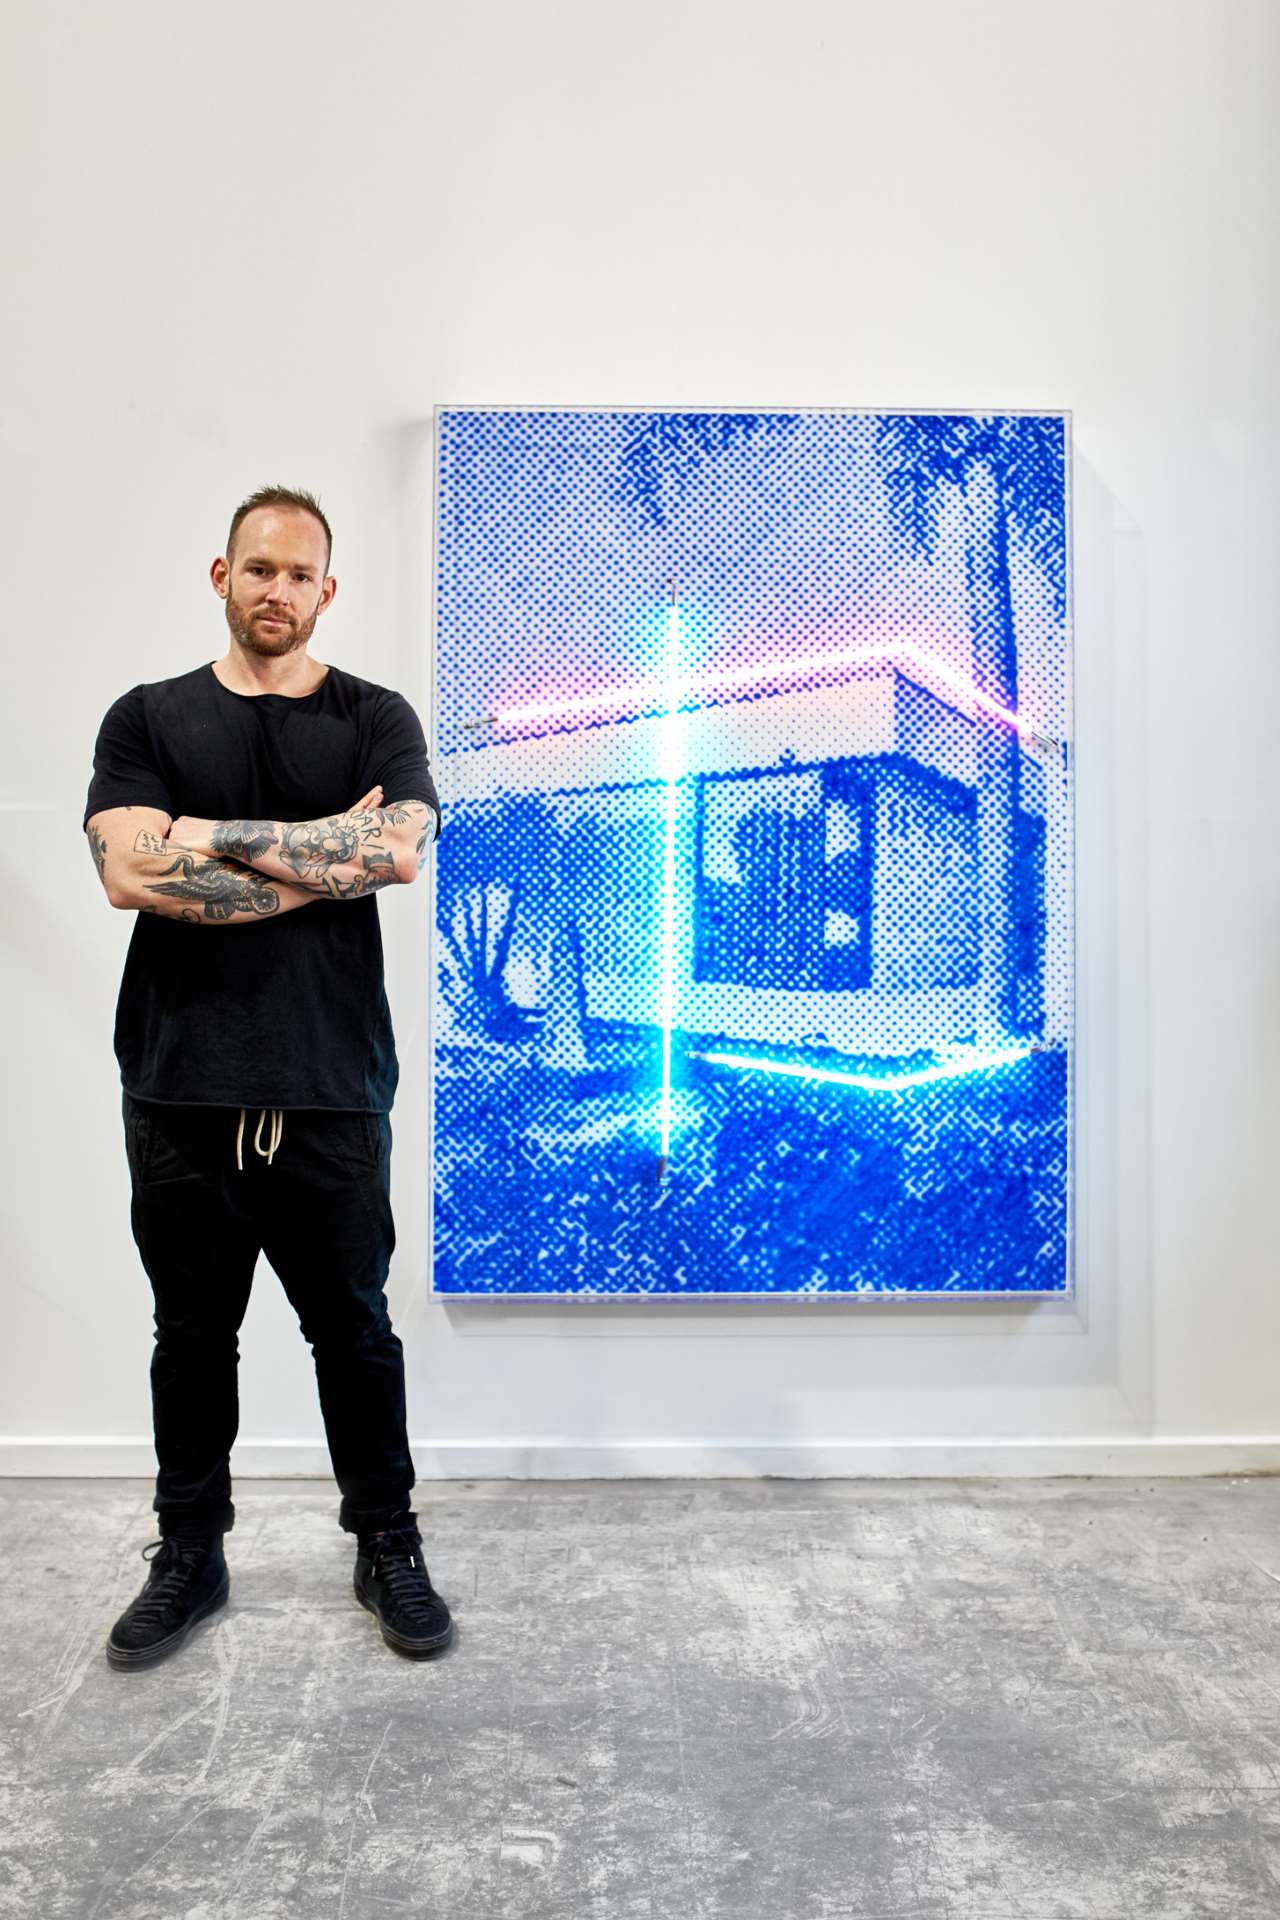 Tom Adair, North facing with palms in the front, Airbrush acrylic polymer and neon on dibond, acrylic frame, 115x160cm. © Tom Adair.